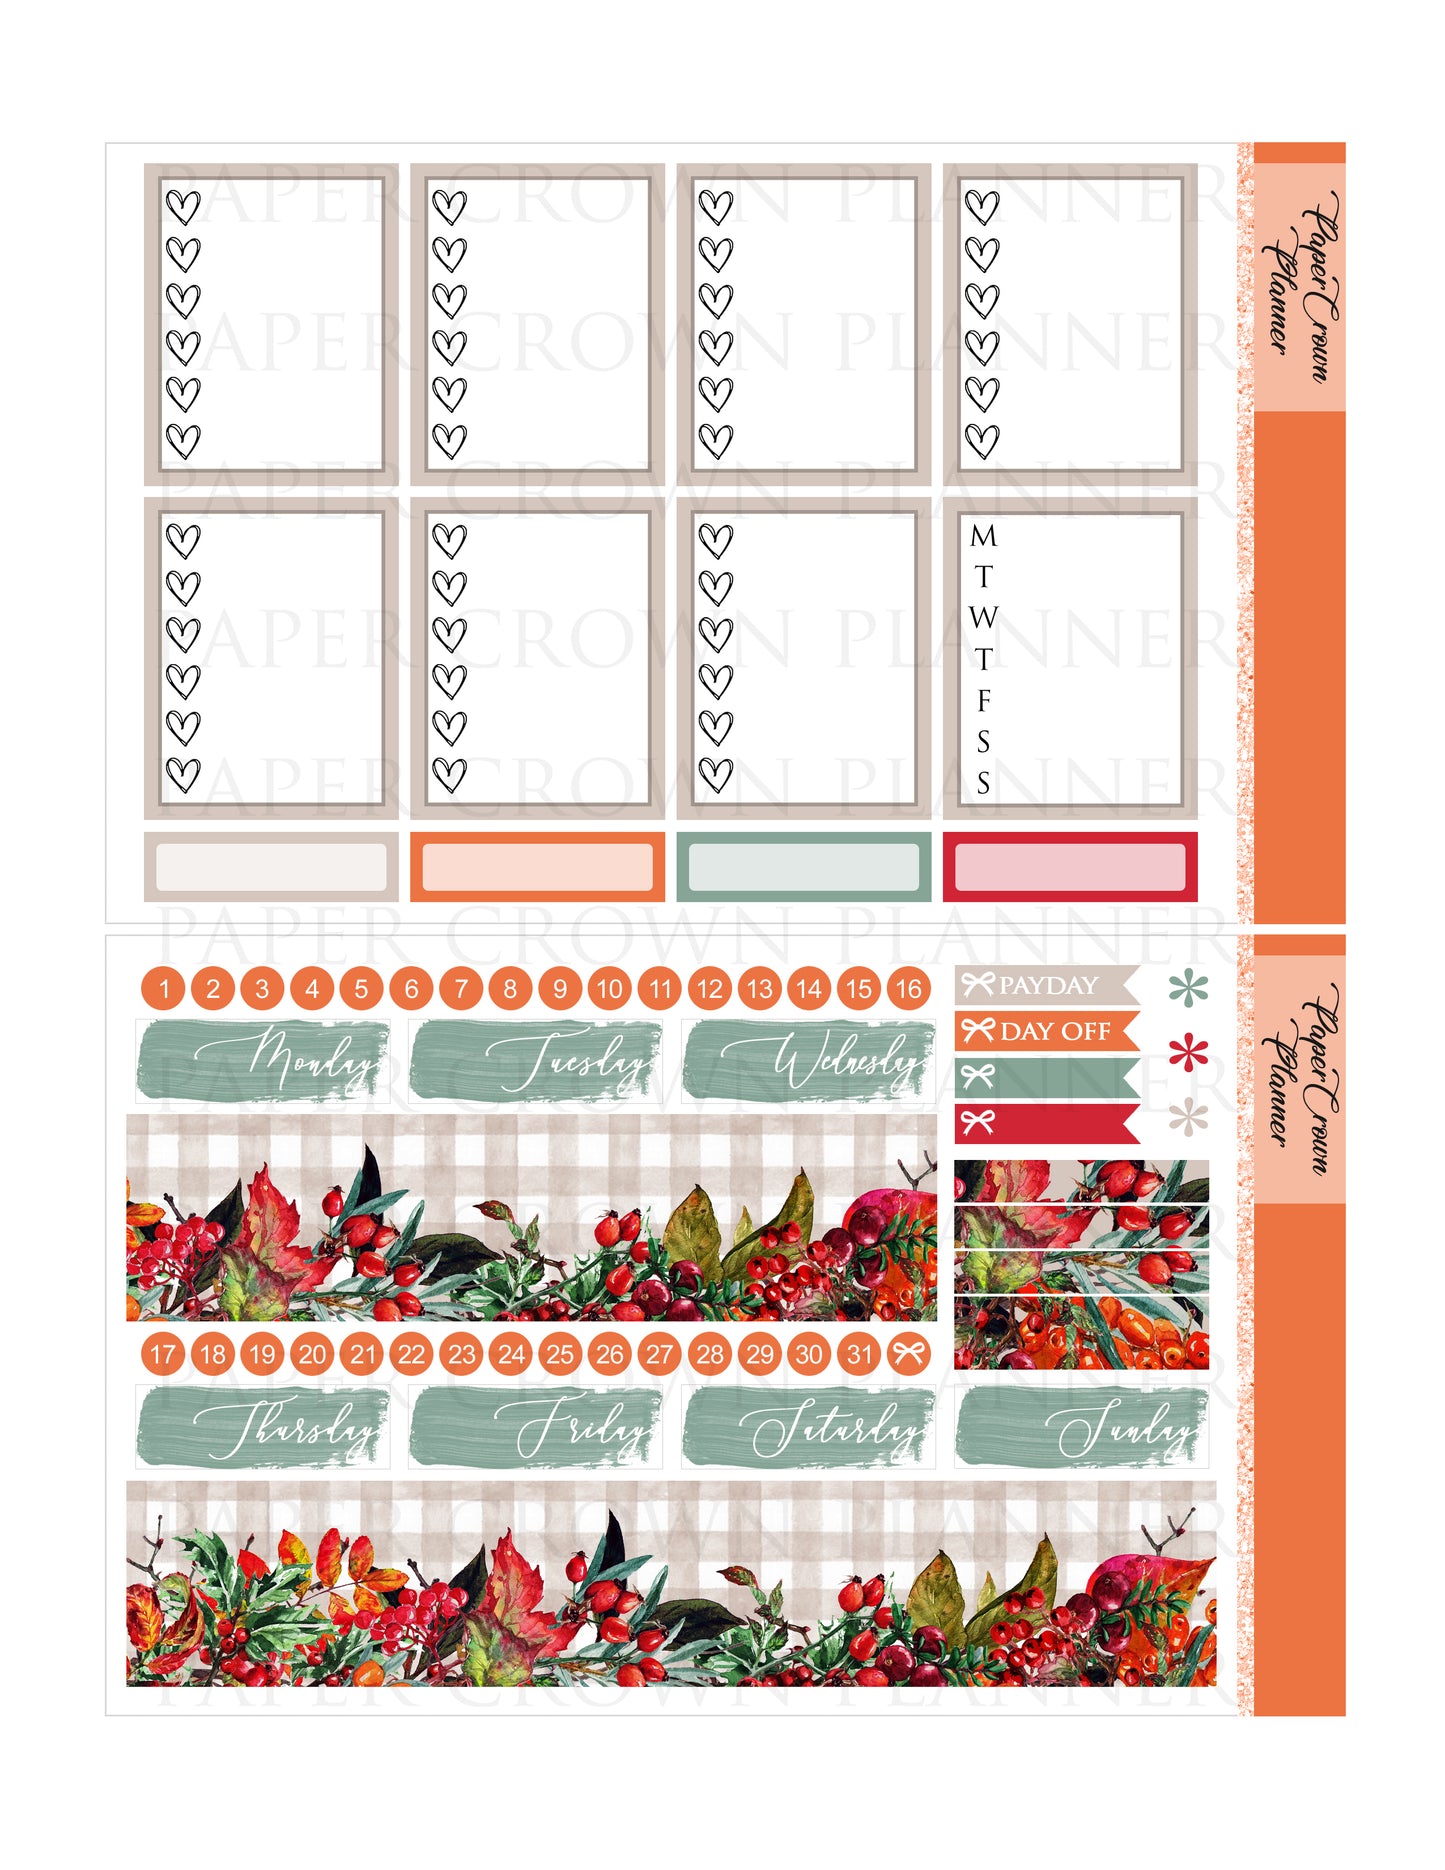 THANKSGIVING DINNER // Weekly Planner Stickers